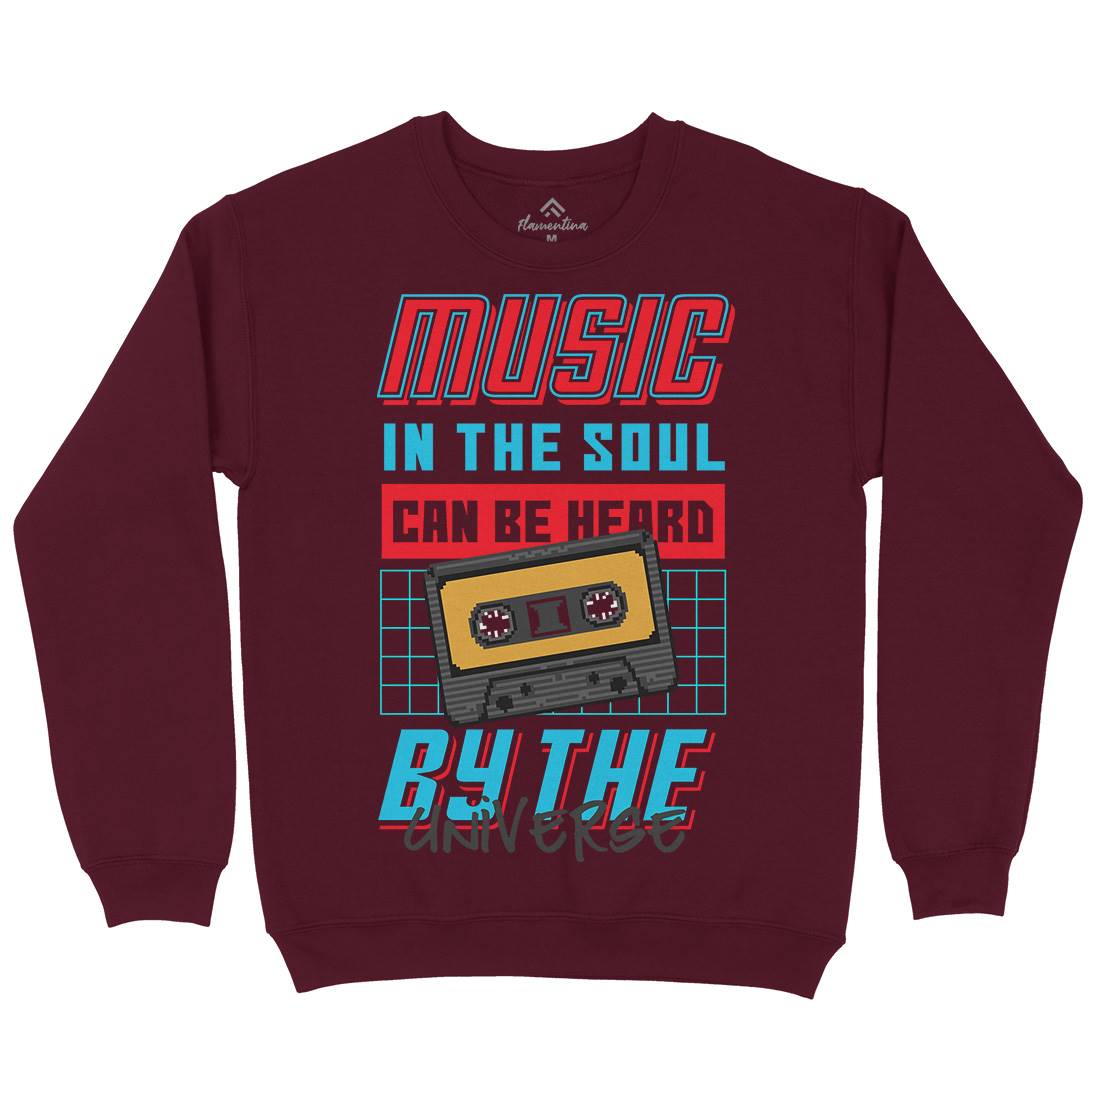 In The Soul Can Be Heard By The Universe Kids Crew Neck Sweatshirt Music B935